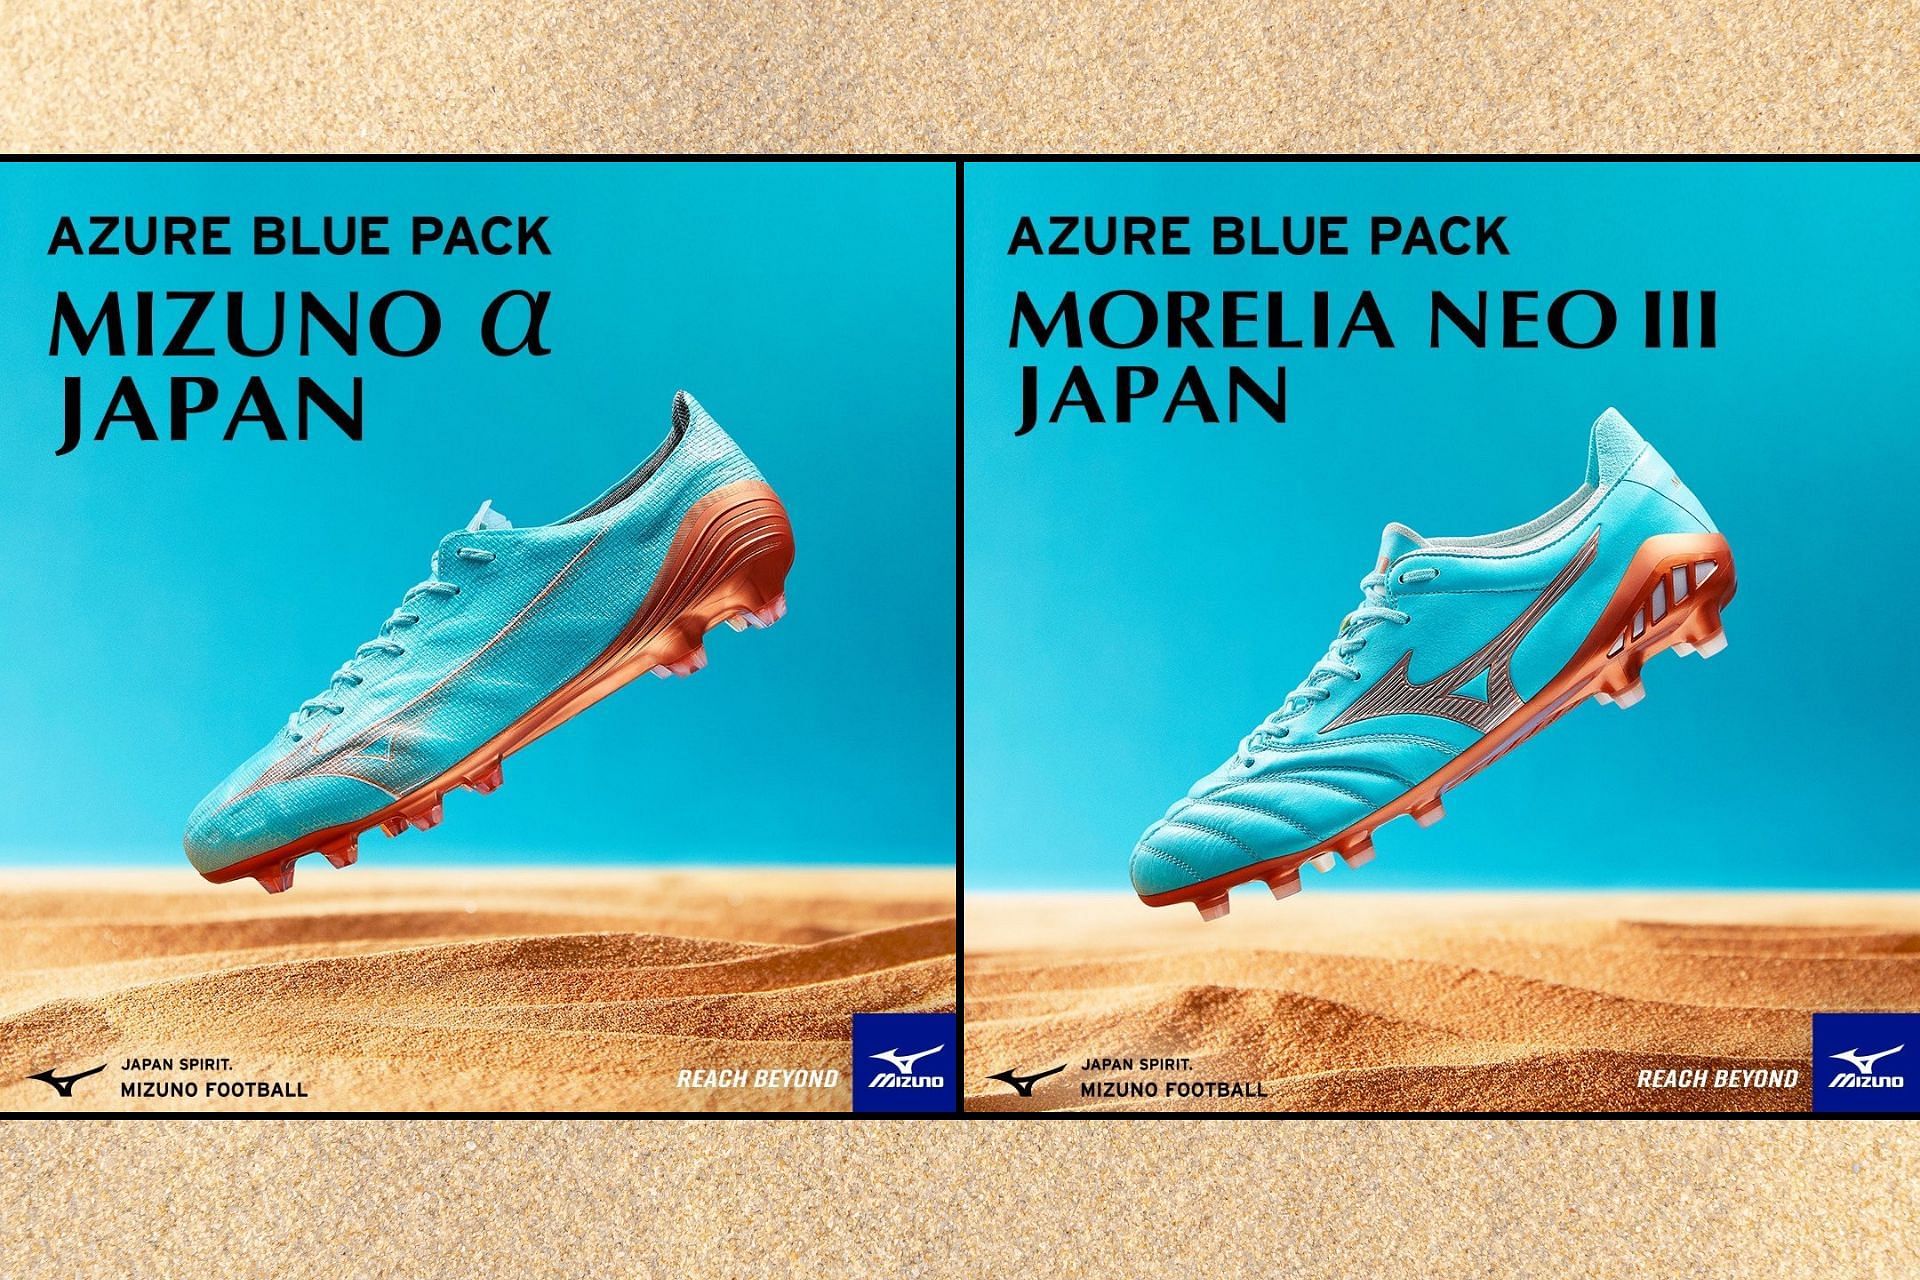 2022 FIFA World Cup: Mizuno 'Azure Blue' Pack: Where to buy, price 